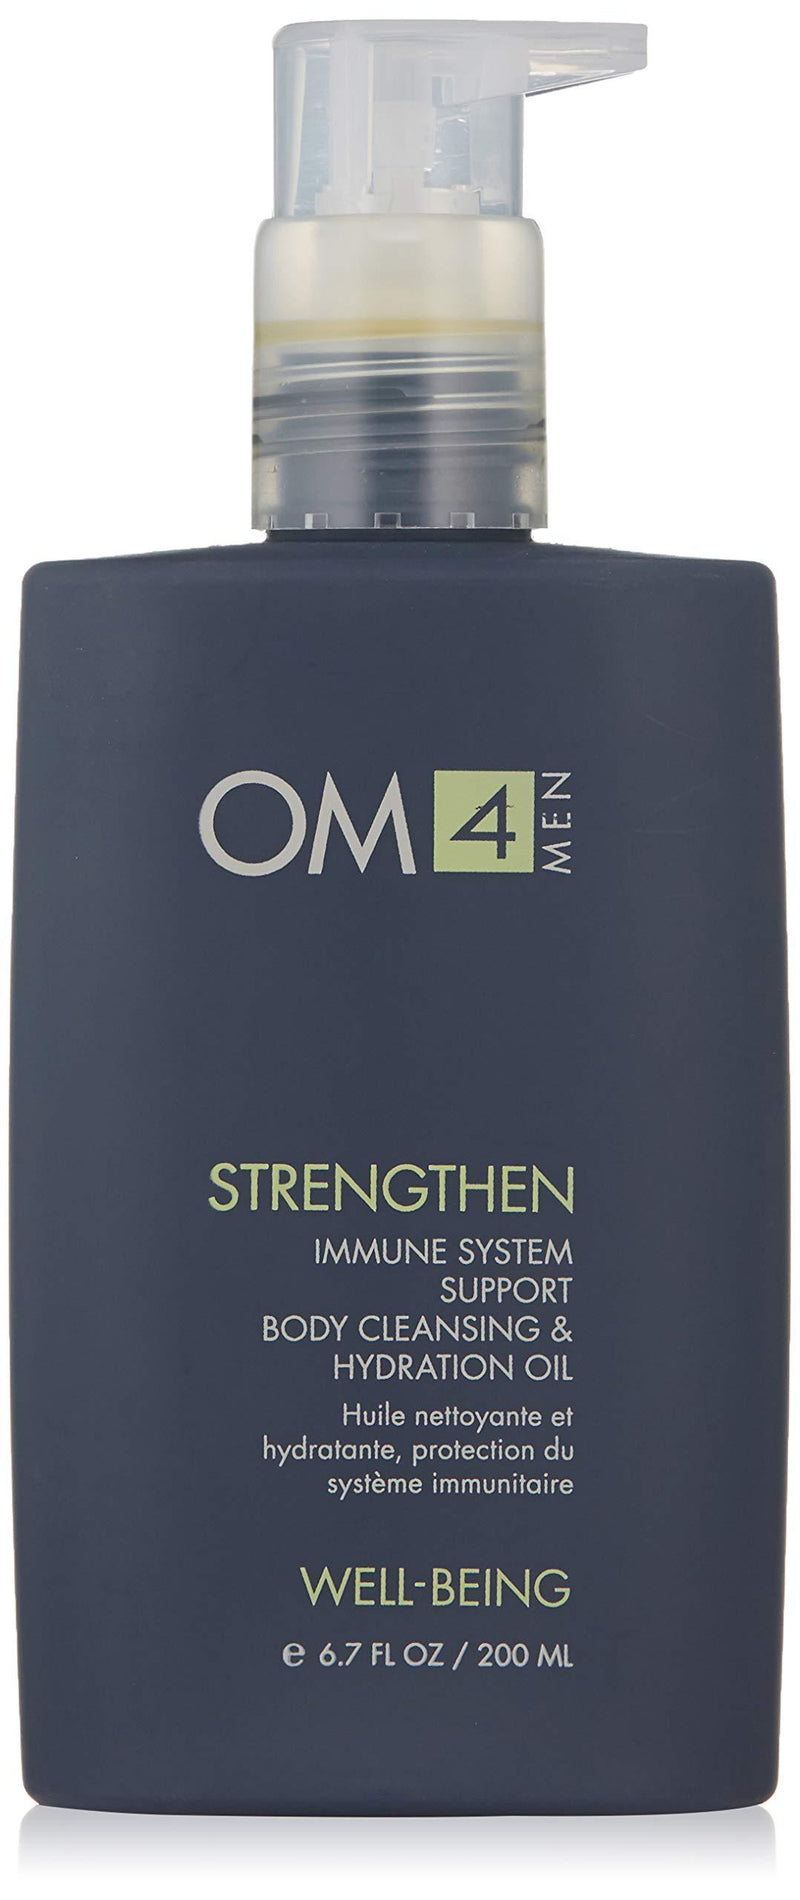 Organic Male OM4 Strengthen: Immune System Support Body Cleansing & Hydration Oil, 6.7 oz. - BeesActive Australia